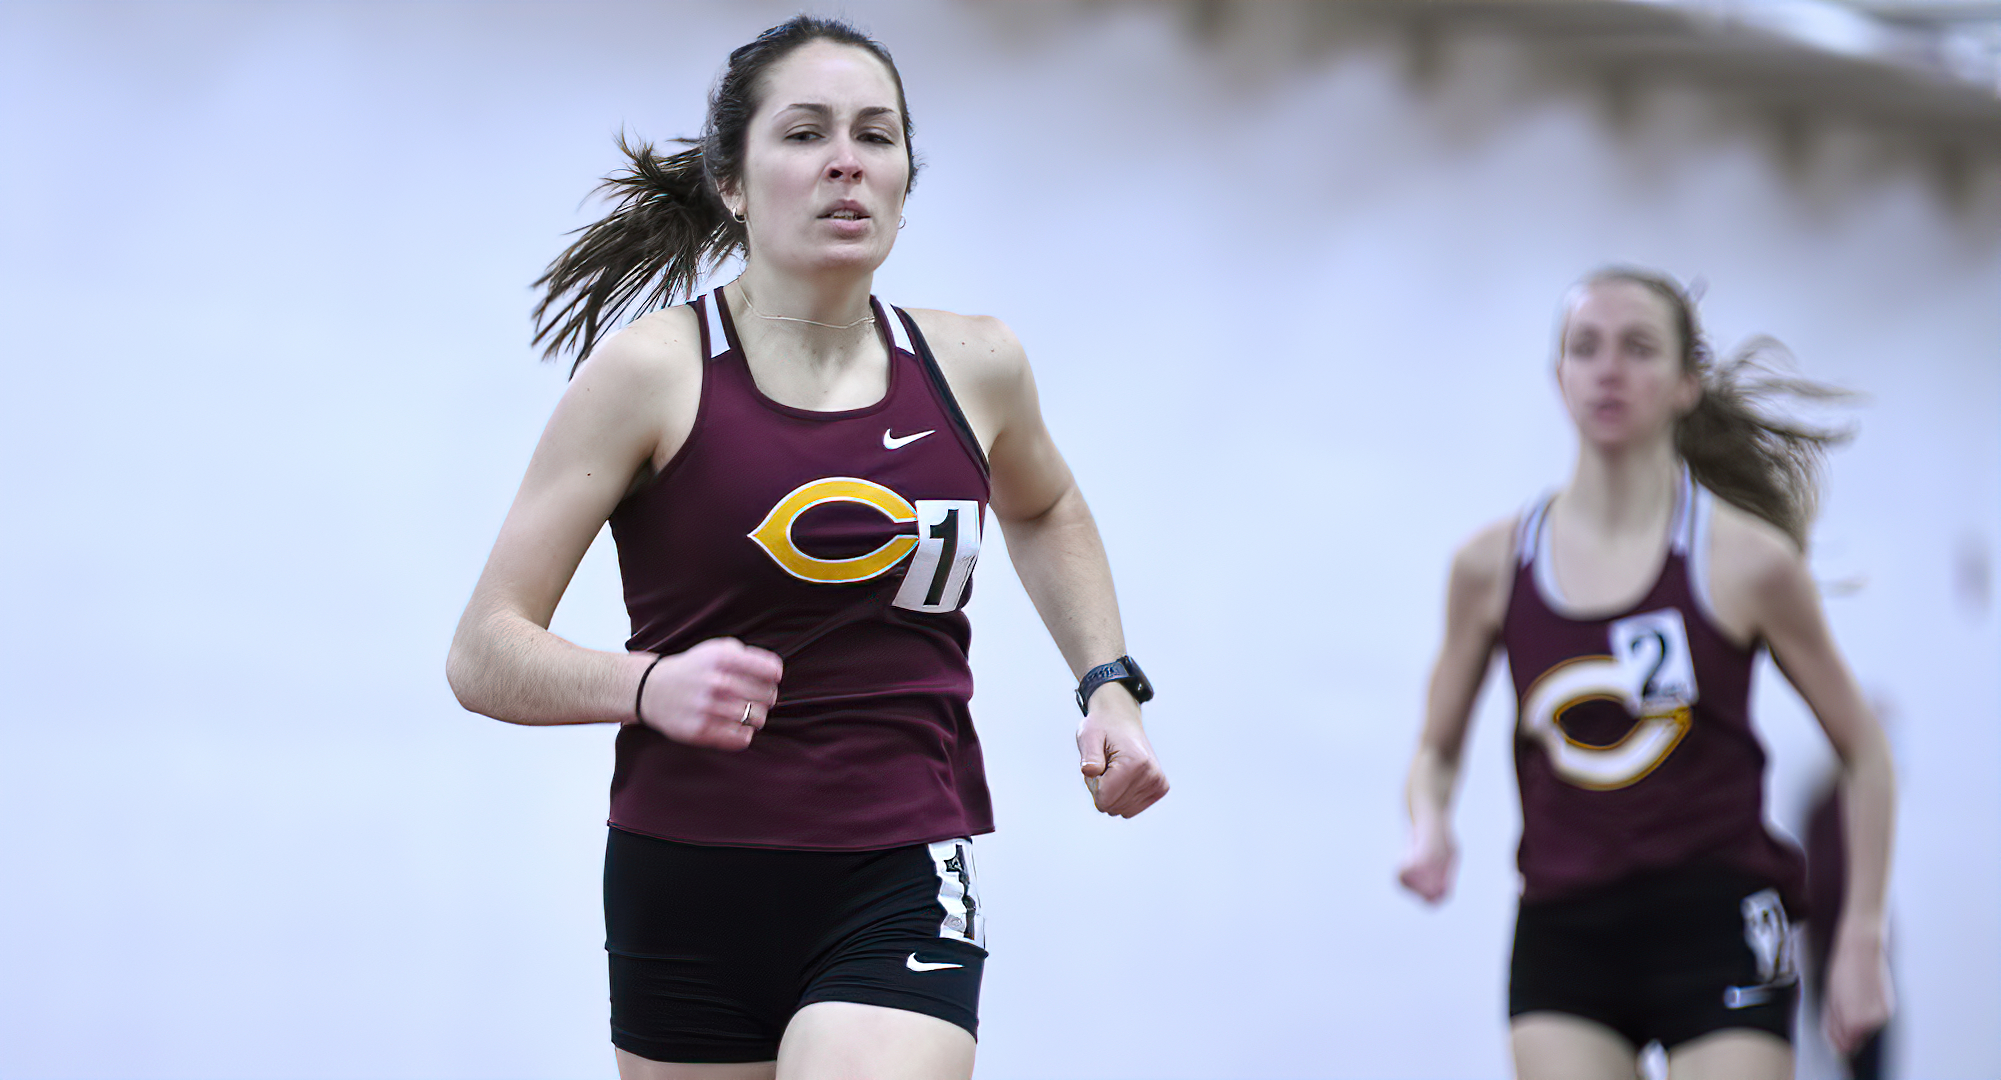 Senior Isabel Fredrickson led Concordia at the UND Open with a fourth-place finish in the mile. She ran a season-best time of 5:20.22.